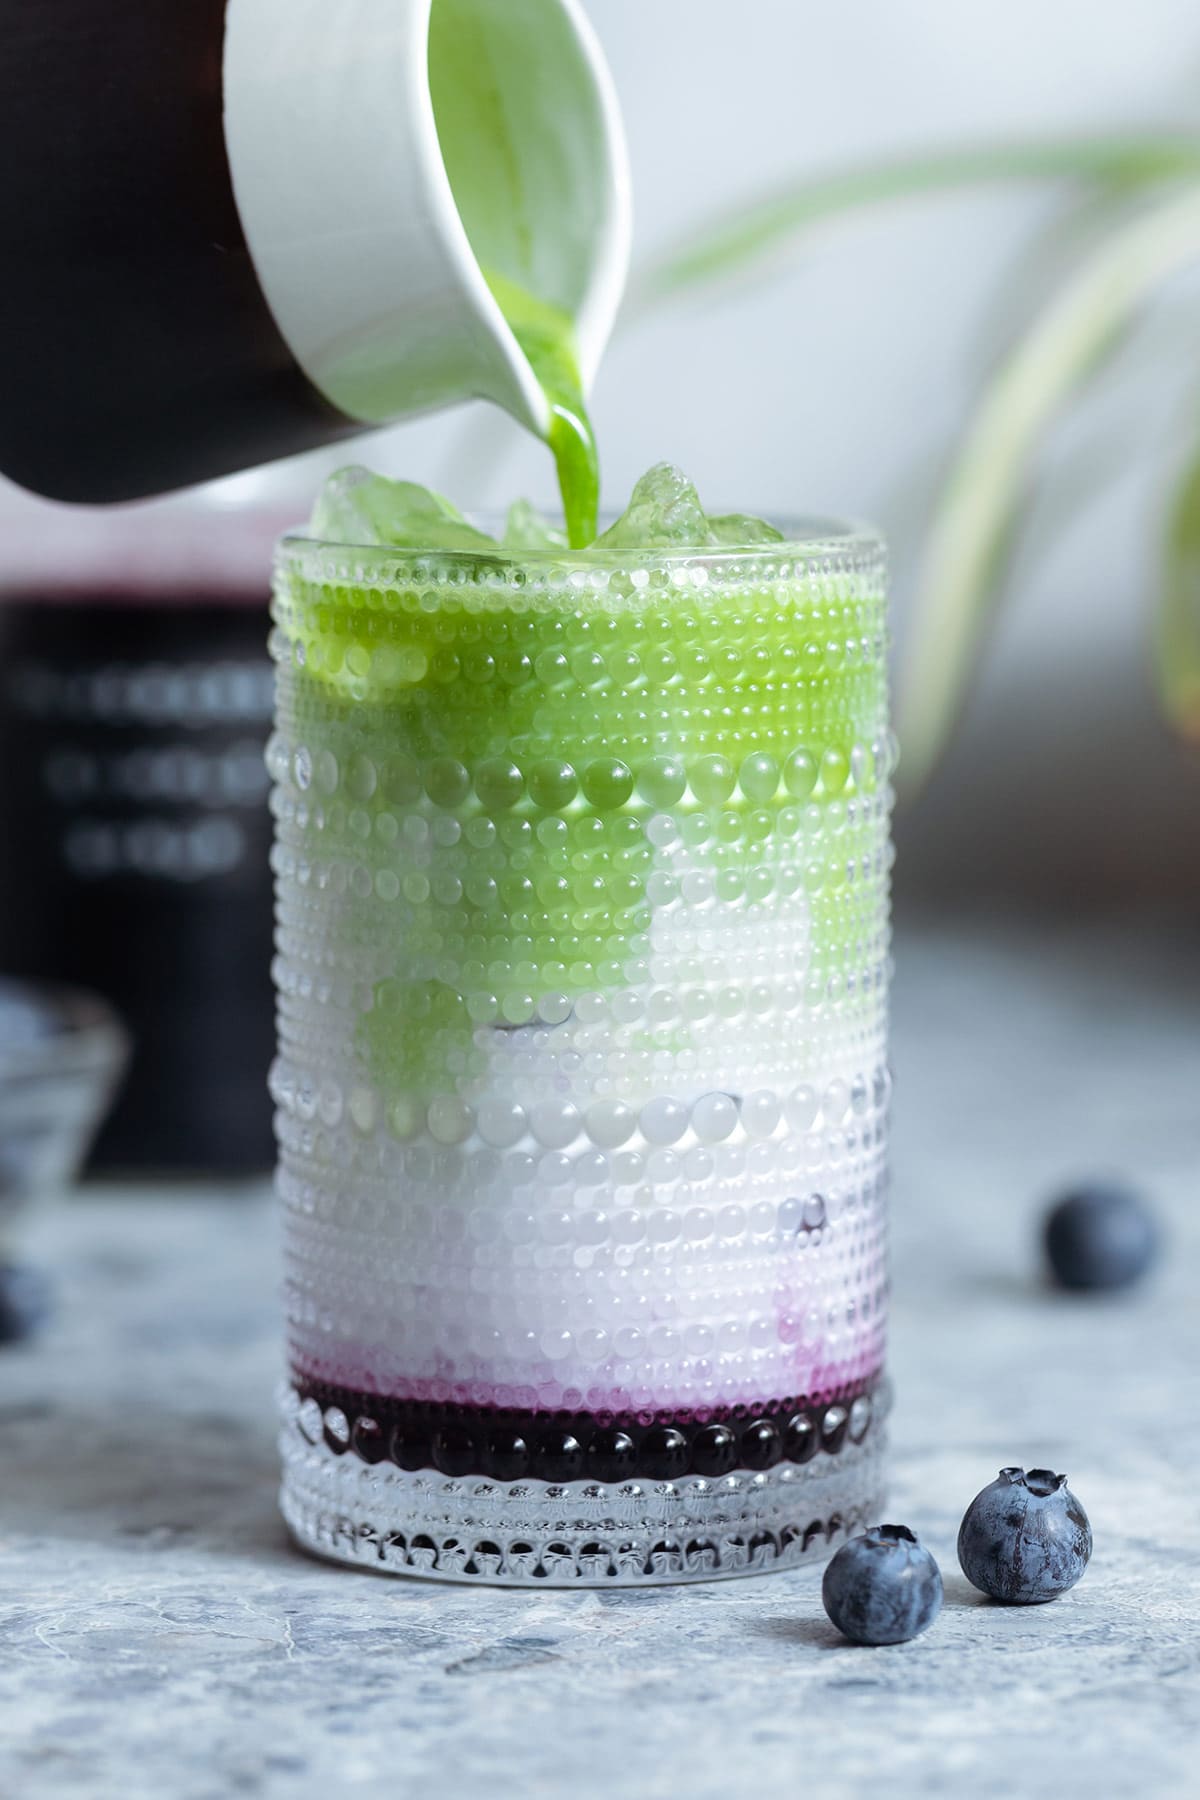 Matcha being poured over milk and blueberry syrup into a tall glass over ice.